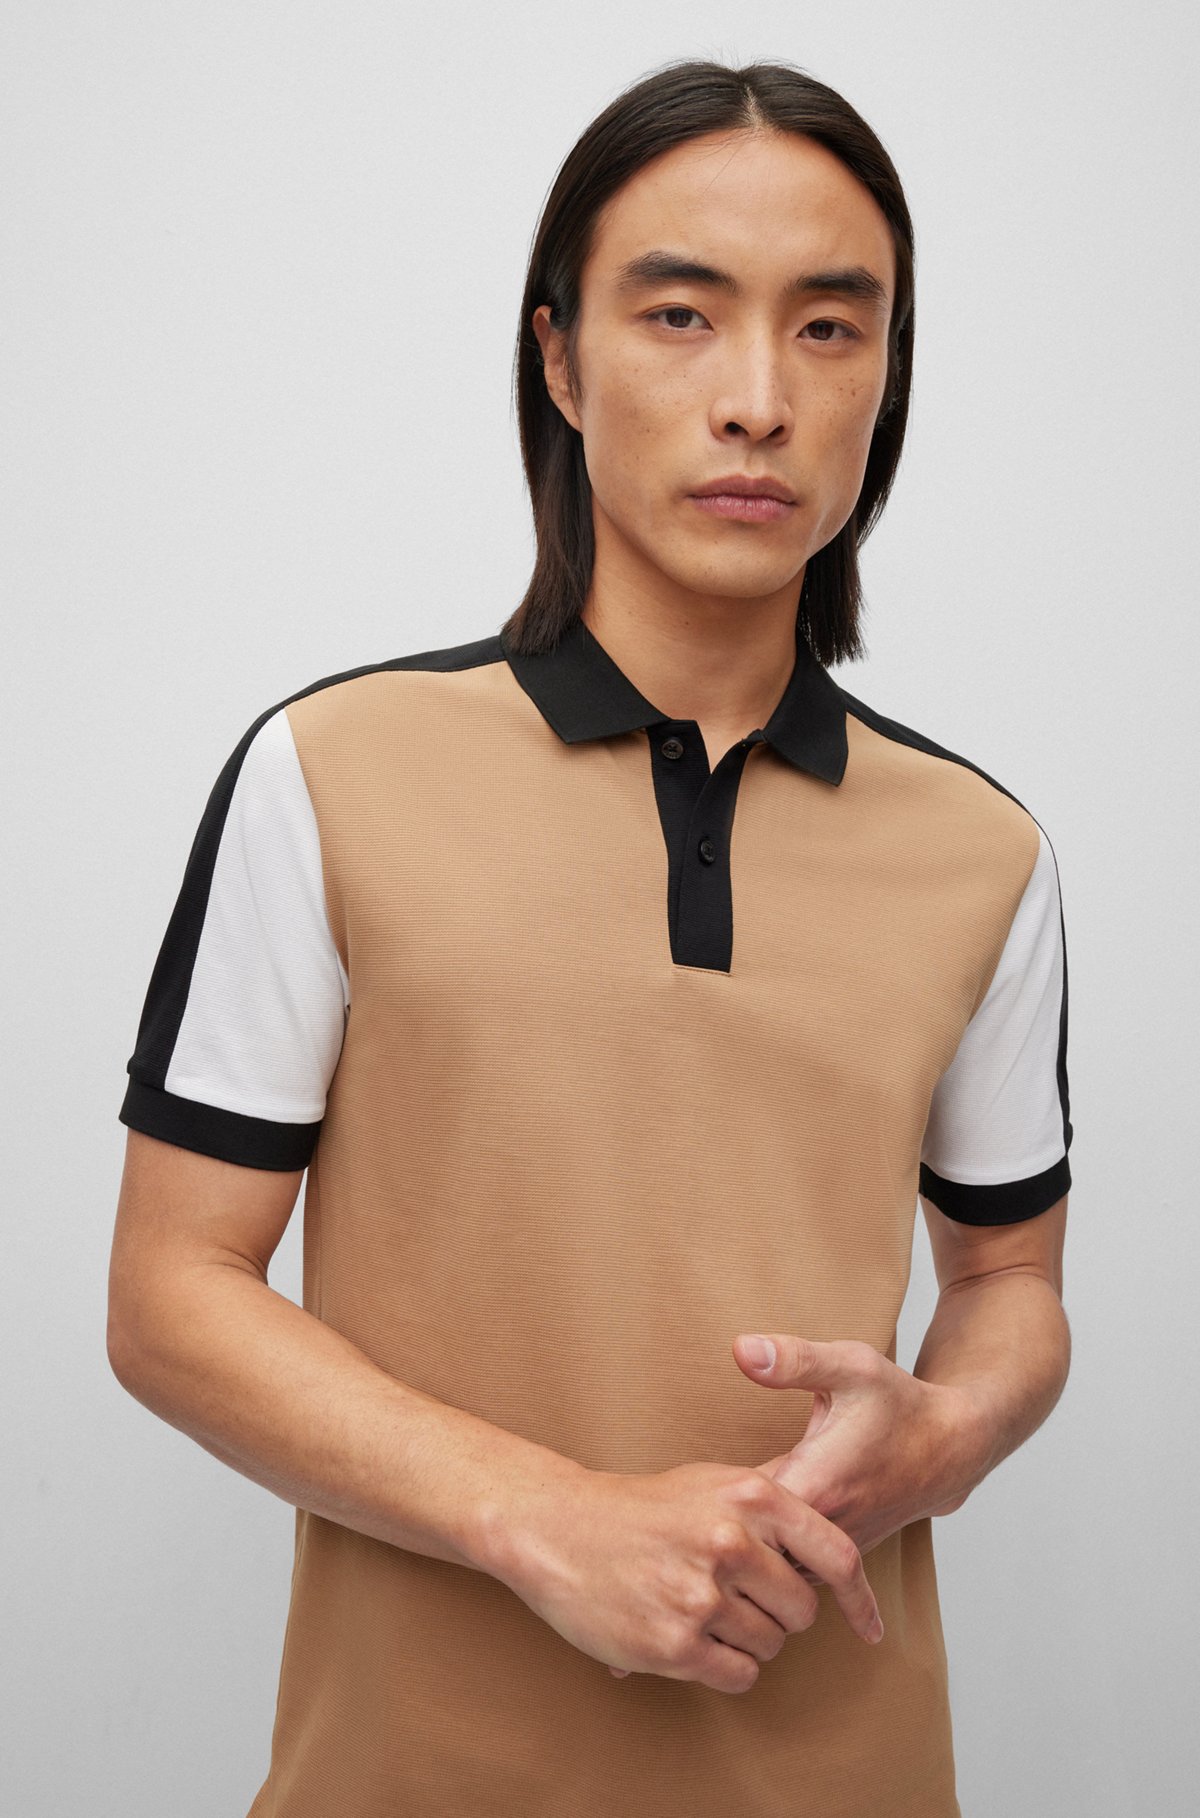 Colour-blocked slim-fit polo shirt in mercerized cotton, Beige